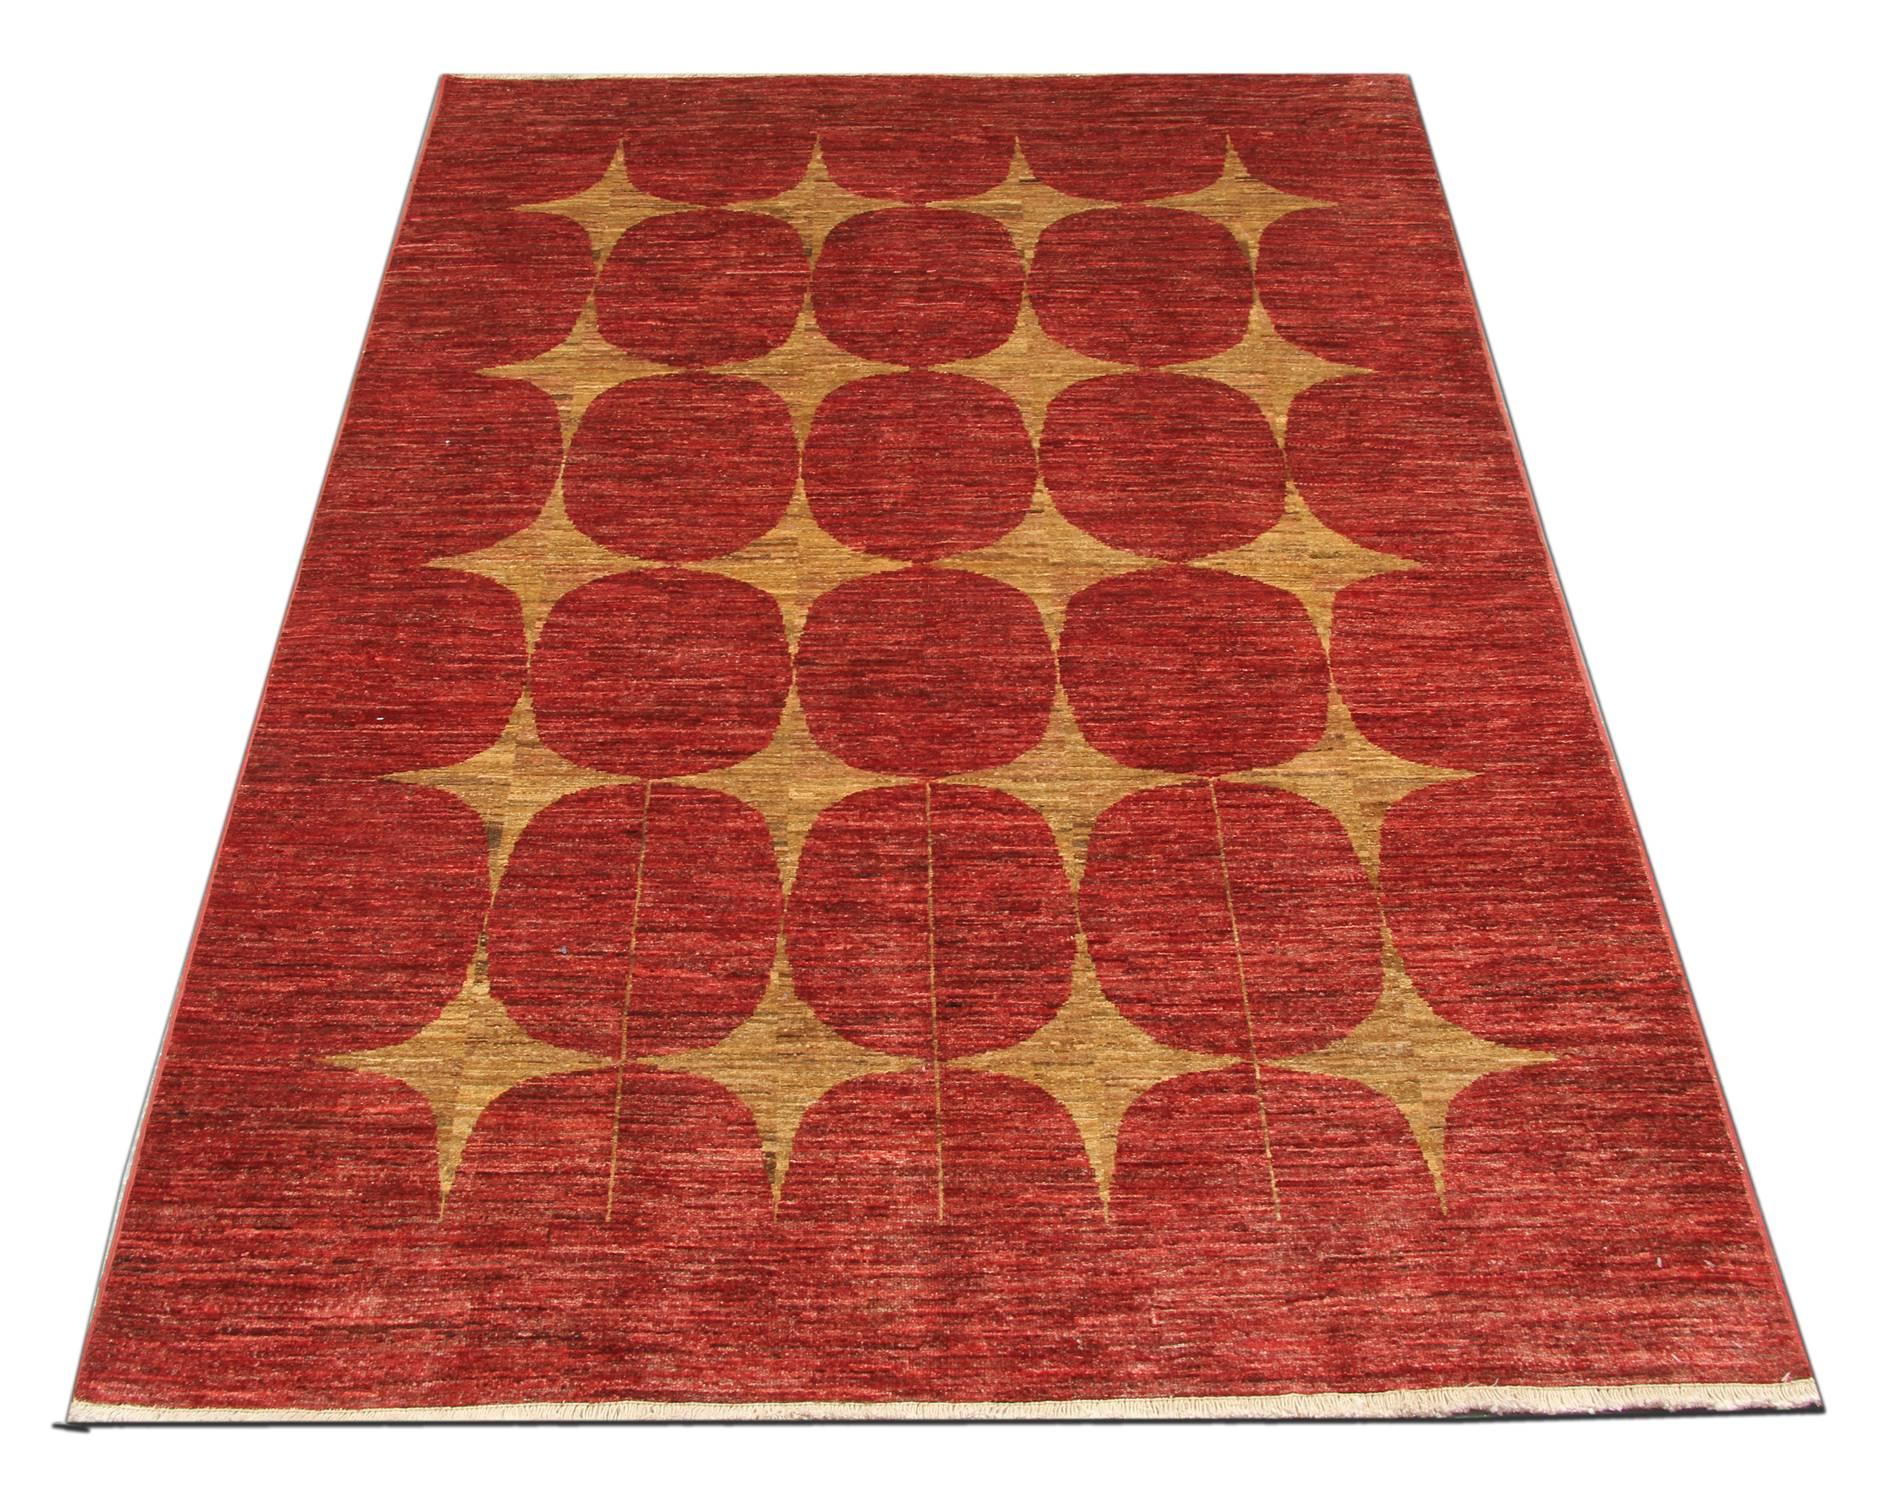 With rich colours and abstract elements, this woven rug gives a subtle contemporary appearance. The geometric carpet features beautiful rust and gold colour. This deep red rug is grounded in stylish colours that will add a touch of modernized